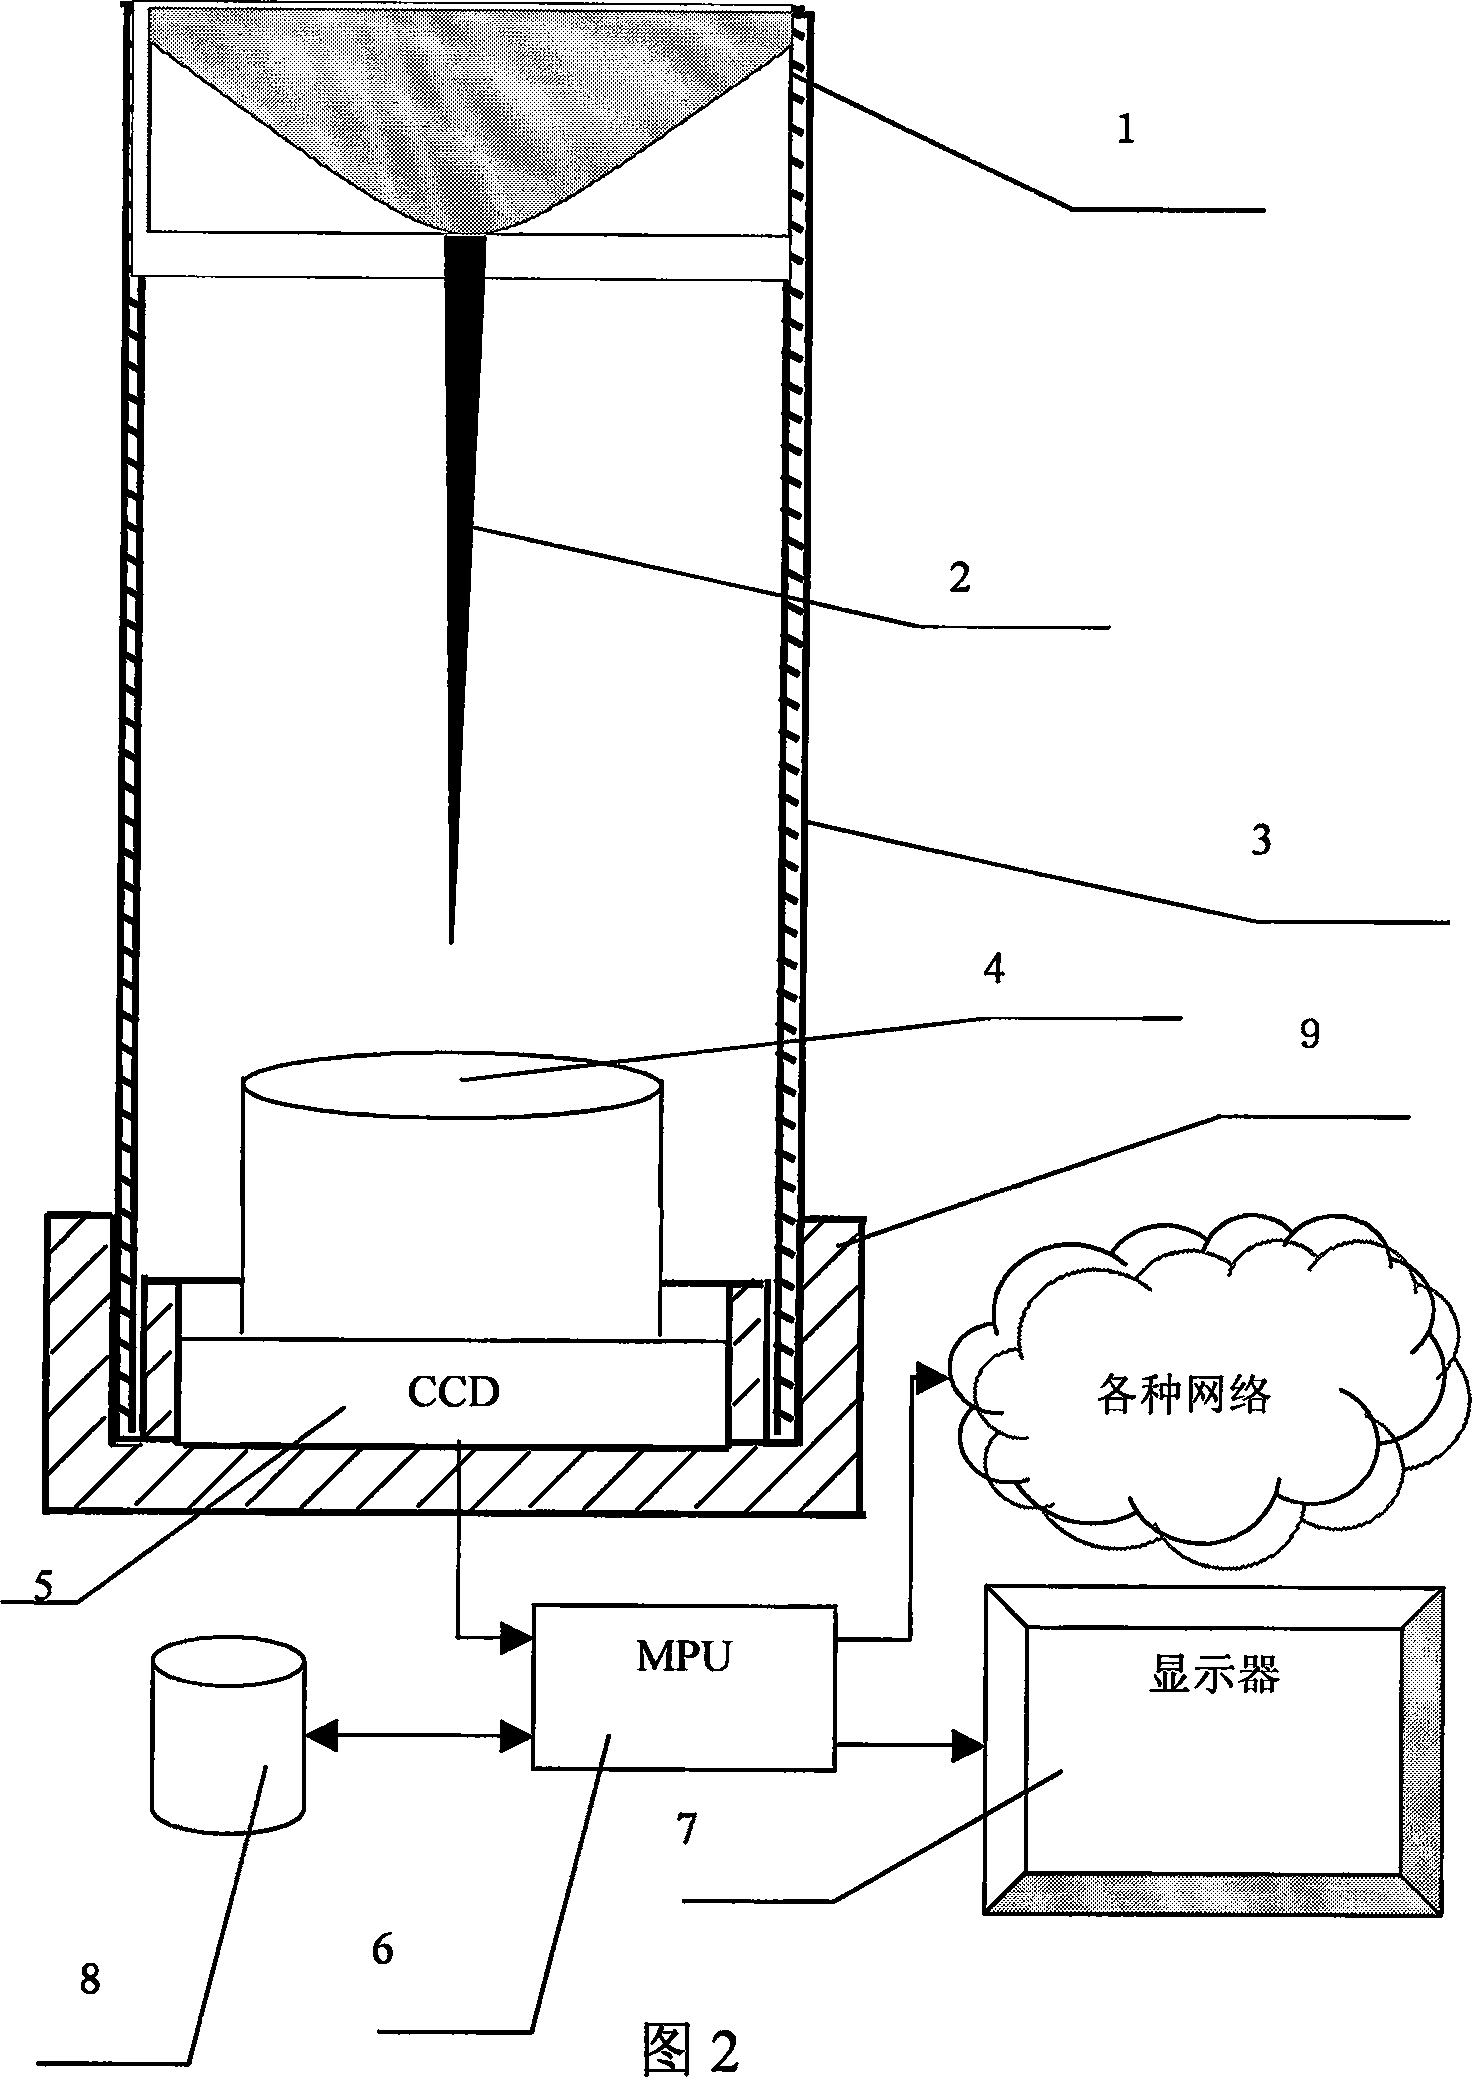 Omnibearing monitor and control sighting device of considering sensory function in the mind